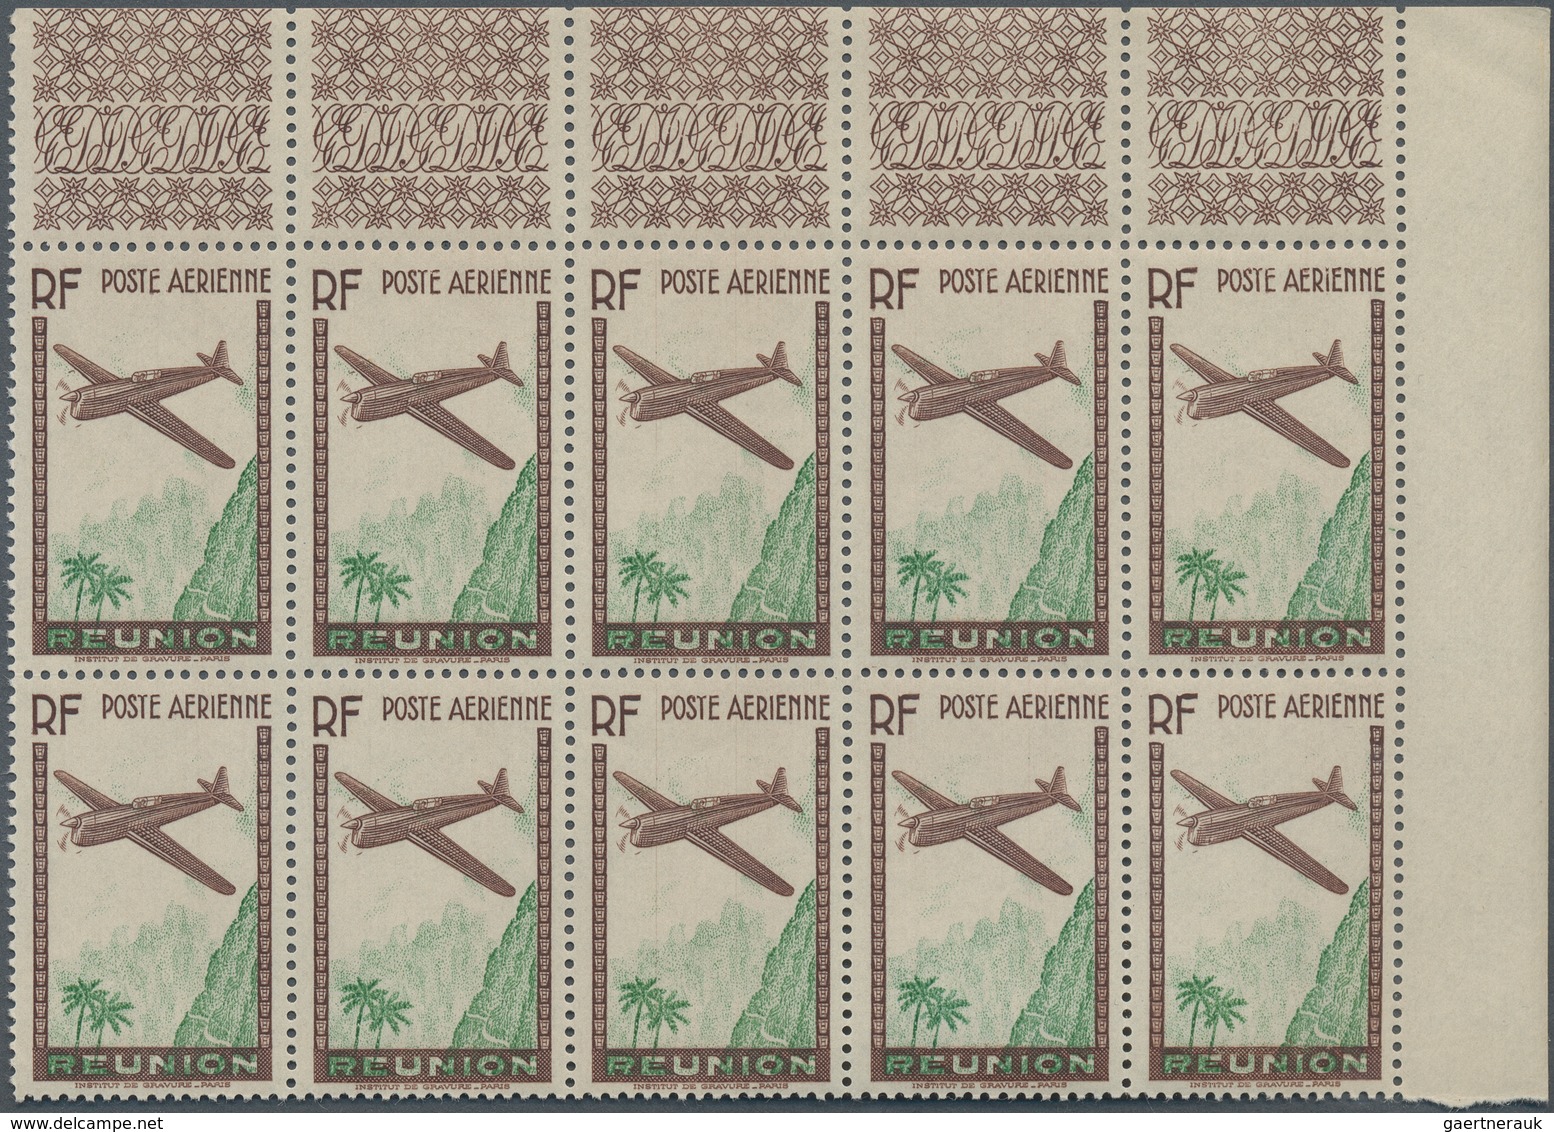 Reunion: 1938, Airmail Issue ‚airplane Over Mountains‘ (12.65fr.) Brown/green With MISSING DENOMINAT - Unused Stamps